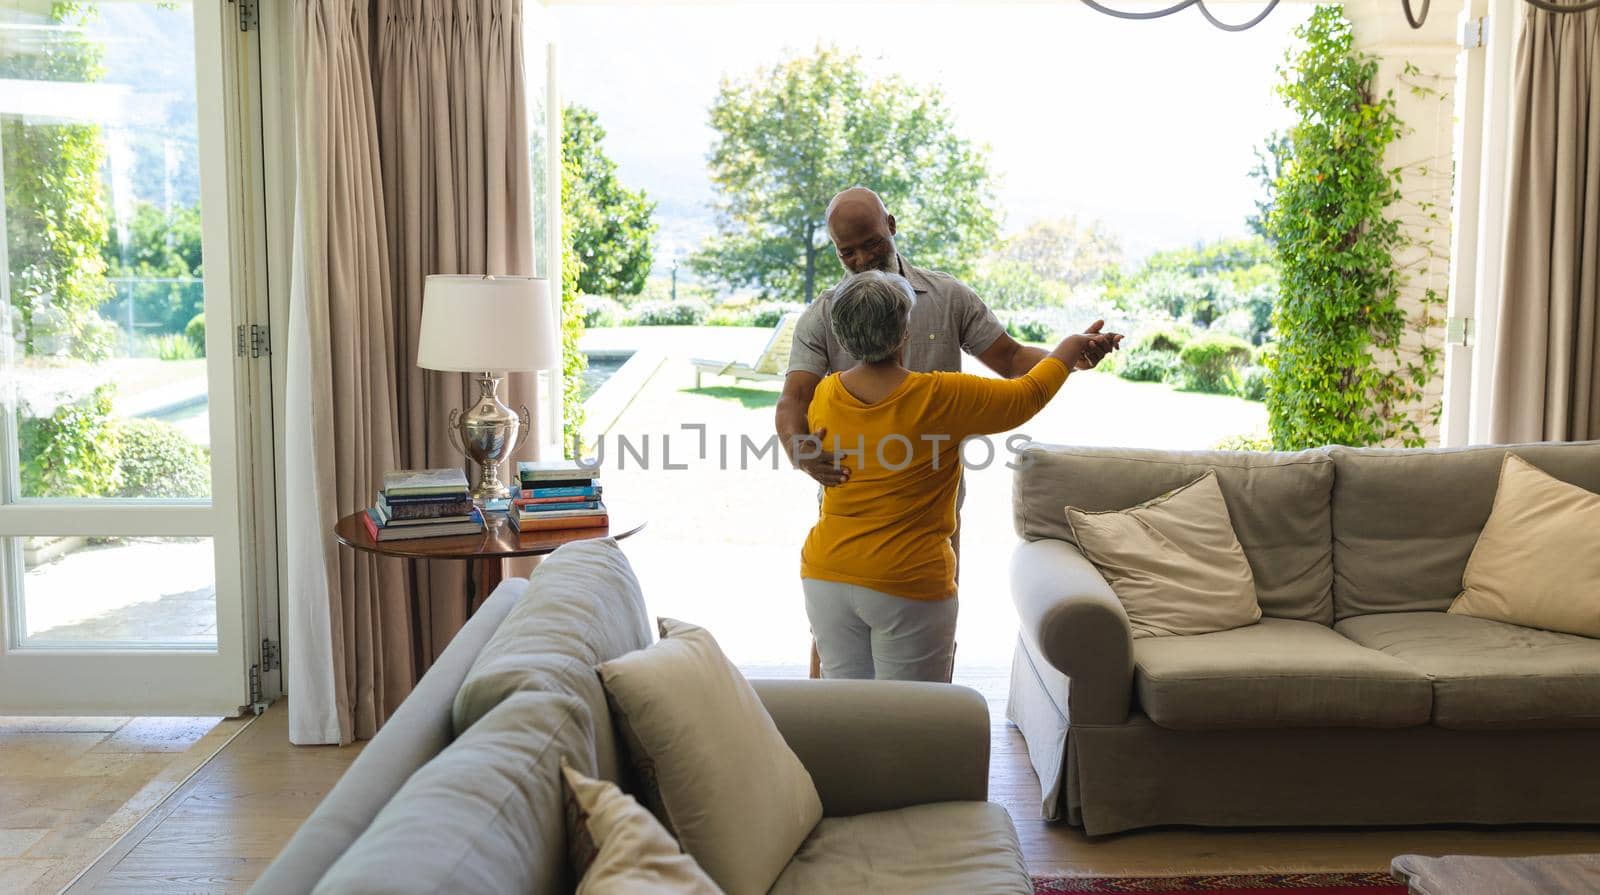 Senior african american couple dancing together in living room. retreat, retirement and happy senior lifestyle concept.